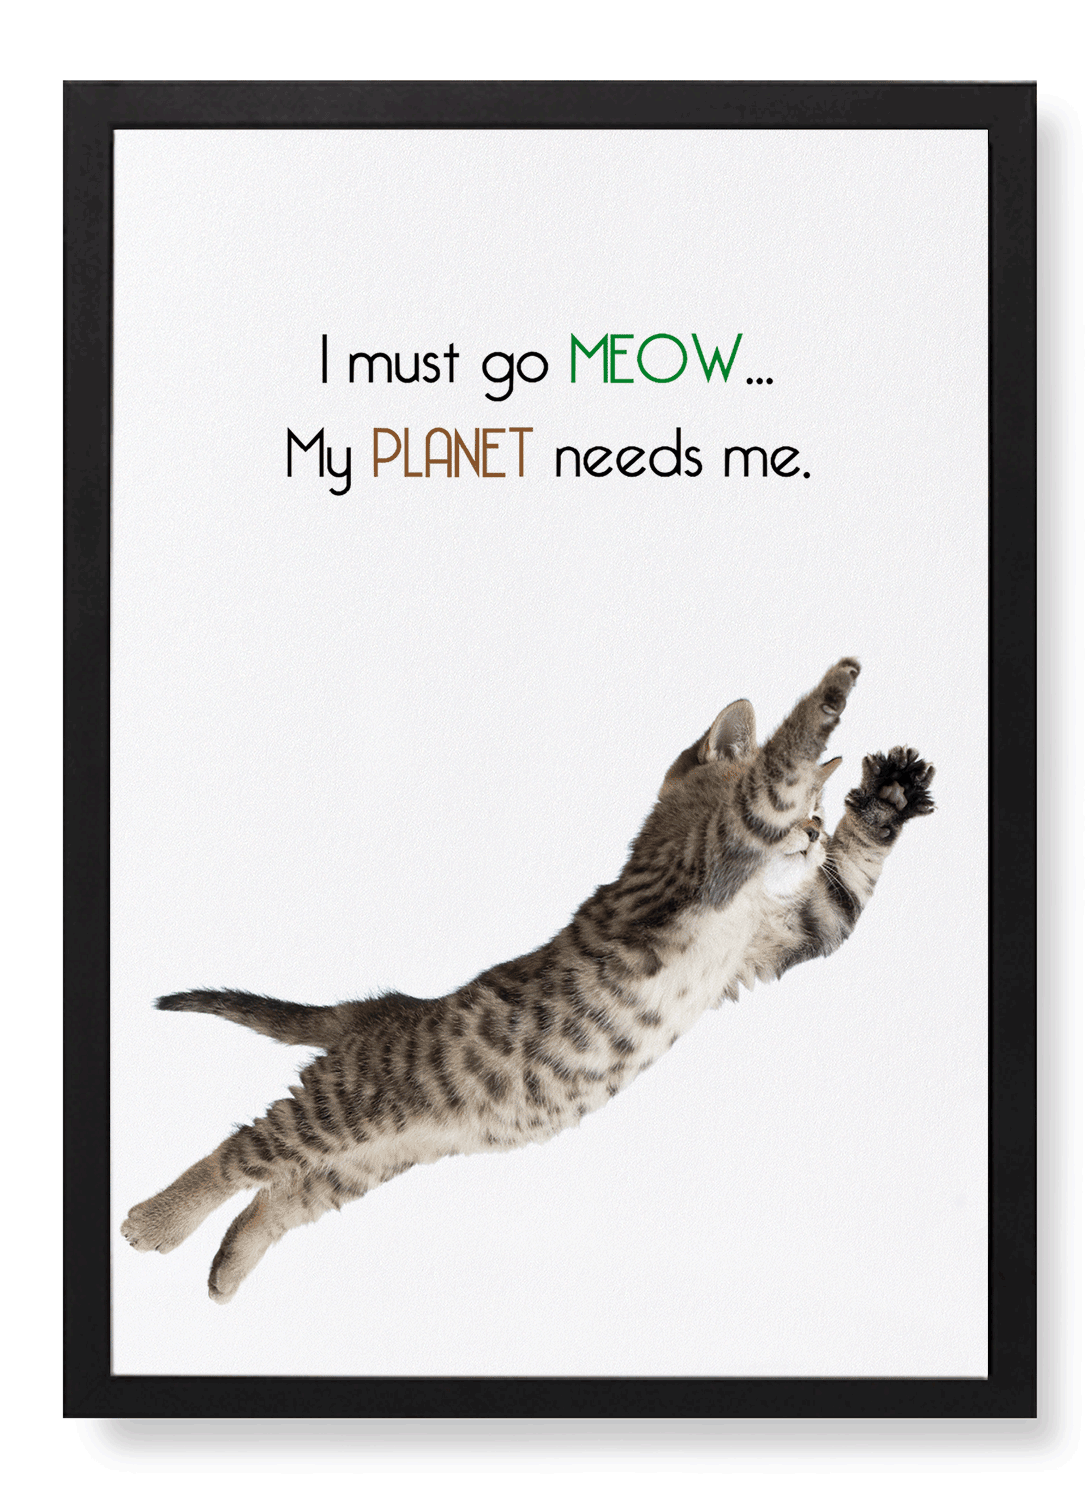 I MUST GO MEOW